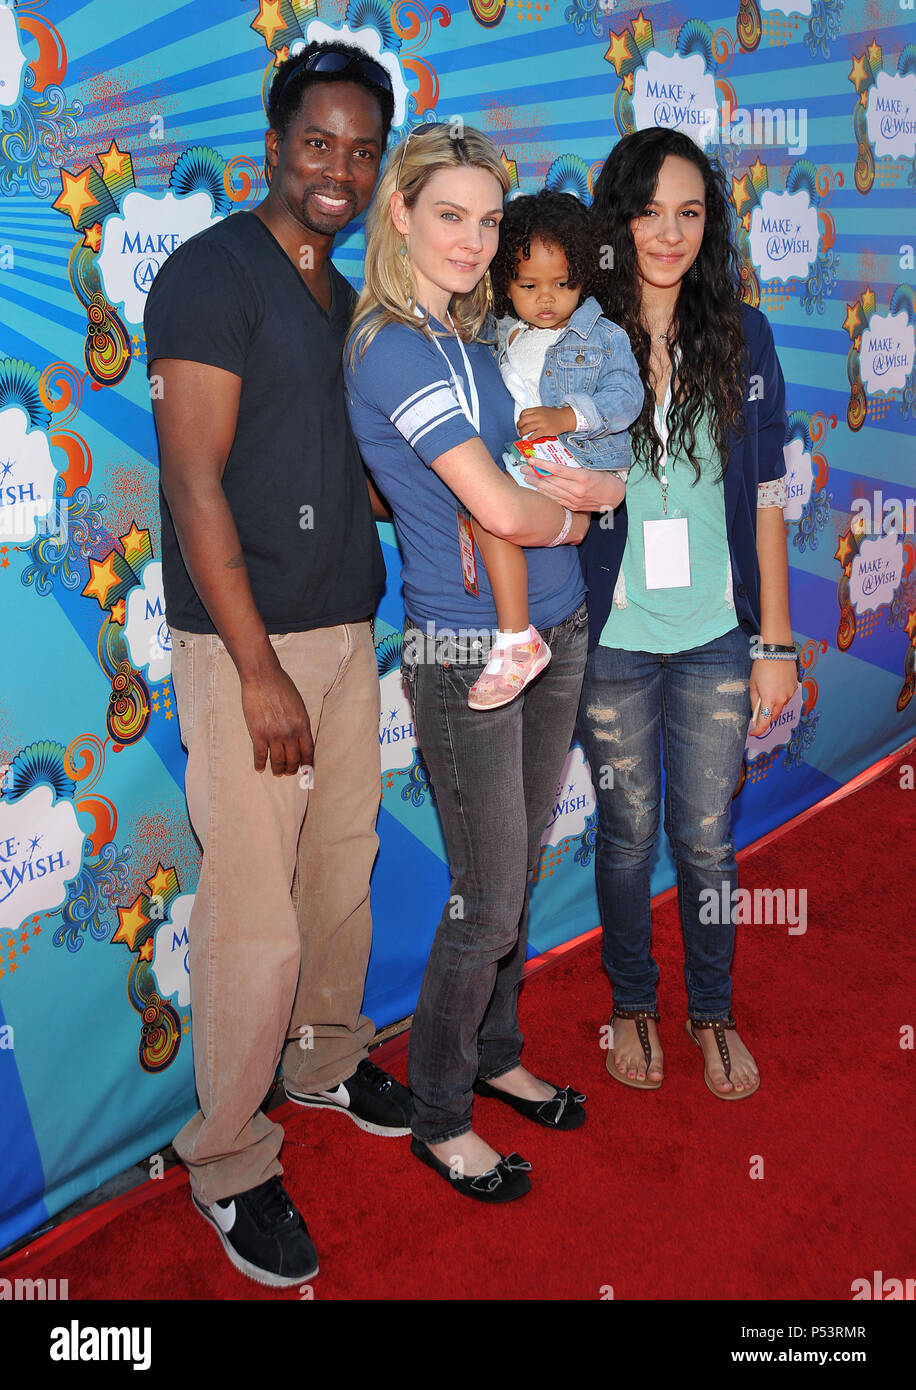 14_ Harold Perrineau _ Wife Brittany _ Daughters Aurora _ Wynter _14   - Make A Wish Foundation Benefit at the Santa Monica Pier in Los Angeles.14_ Harold Perrineau _ Wife Brittany _ Daughters Aurora _ Wynter _14  Event in Hollywood Life - California, Red Carpet Event, USA, Film Industry, Celebrities, Photography, Bestof, Arts Culture and Entertainment, Celebrities fashion, Best of, Hollywood Life, Event in Hollywood Life - California, Red Carpet and backstage, Music celebrities, Topix, Couple, family ( husband and wife ) and kids- Children, brothers and sisters inquiry tsuni@Gamma-USA.com, Cr Stock Photo